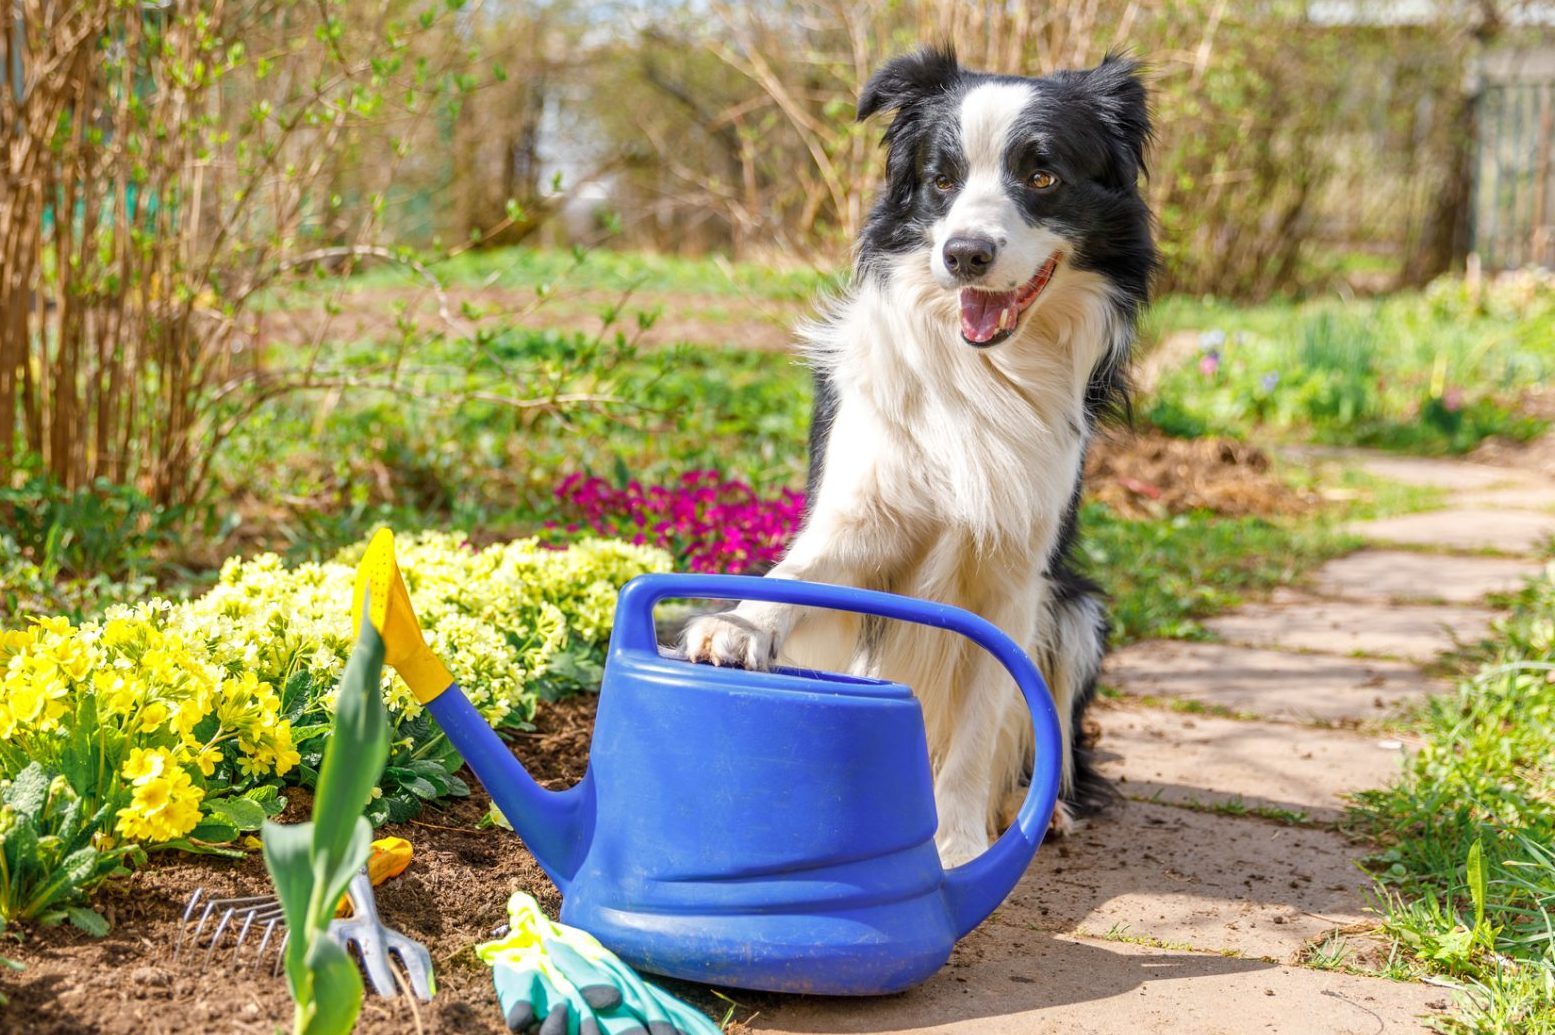 Outdoor portrait of cute dog border collie with watering can in garden background. Funny puppy dog as gardener fetching watering can for irrigation. Gardening and agriculture concept.